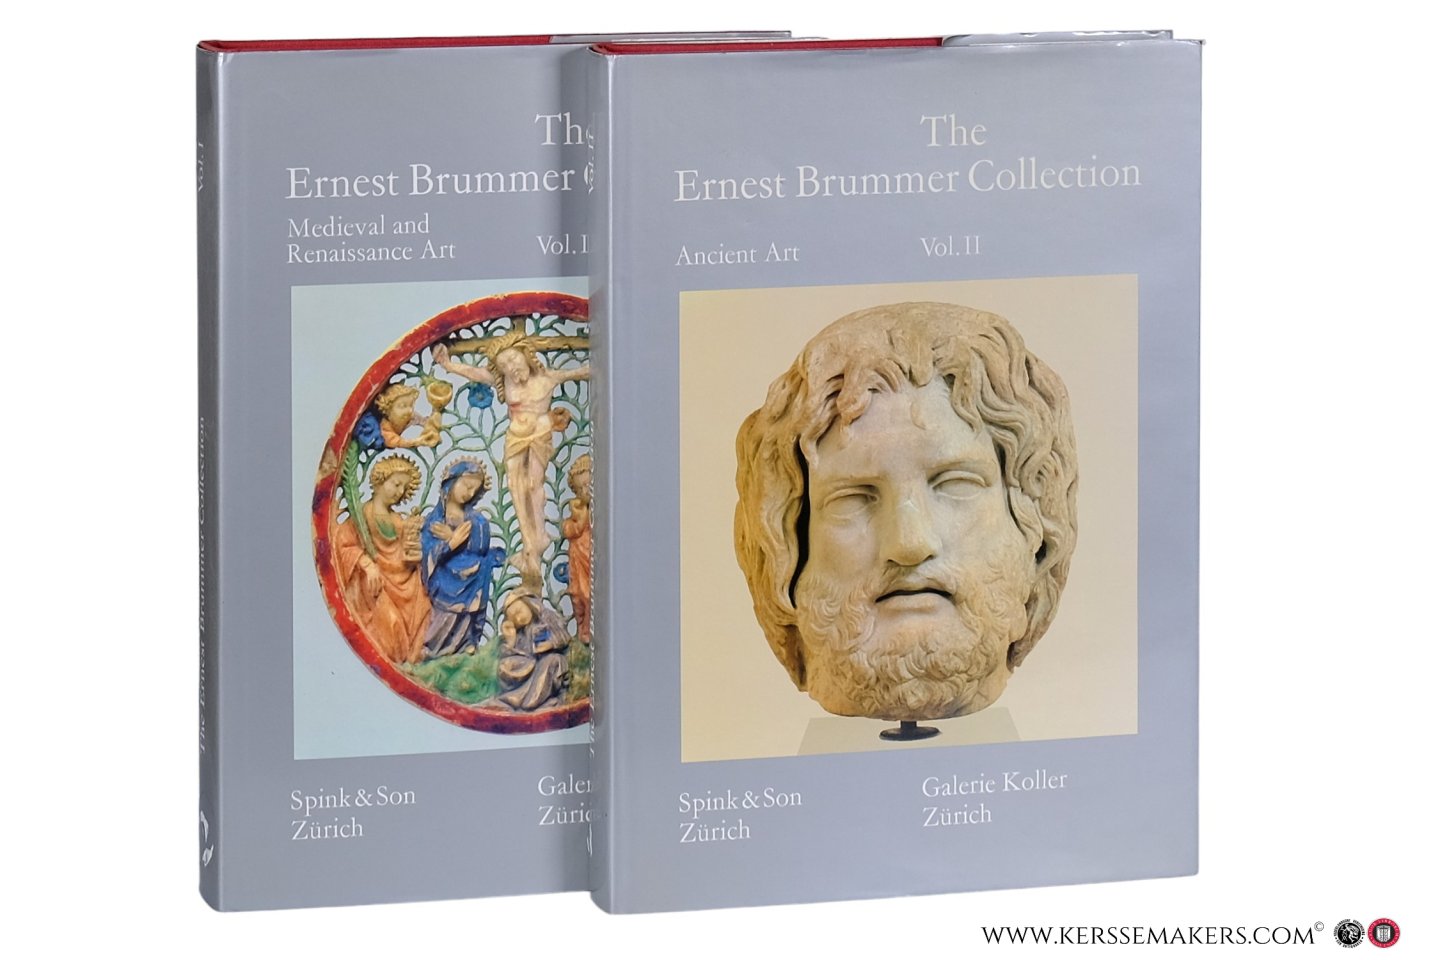 Brummer, Ernest. - The Ernest Brummer Collection [ 2 volumes ]1: Medieval, Renaissance and Baroque Art. 2: Ancient Art. Auction sale from 16th to 19th October 1979 at the Grand Hotel Dolder, Zurich.